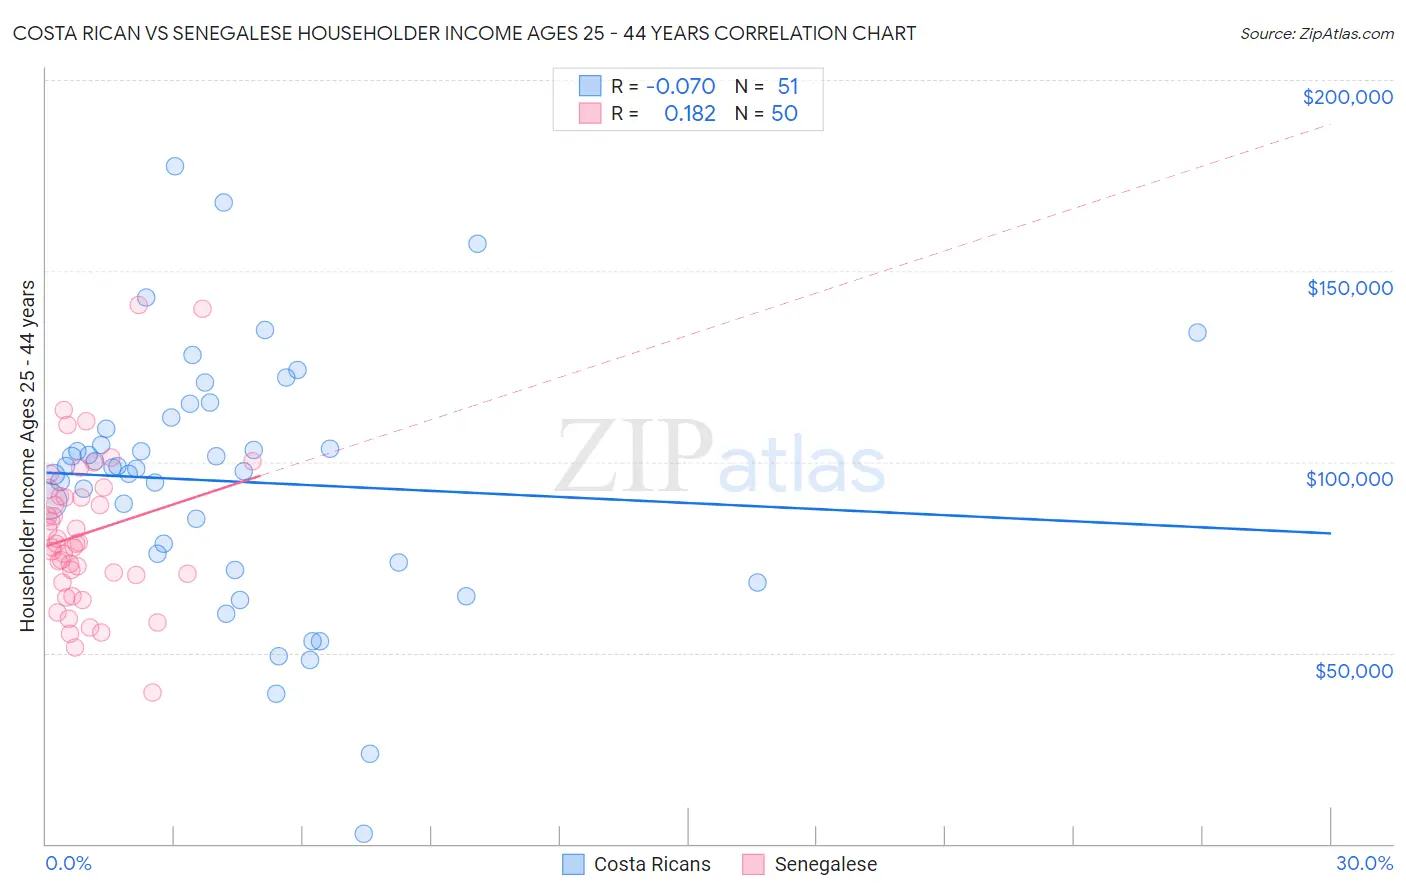 Costa Rican vs Senegalese Householder Income Ages 25 - 44 years